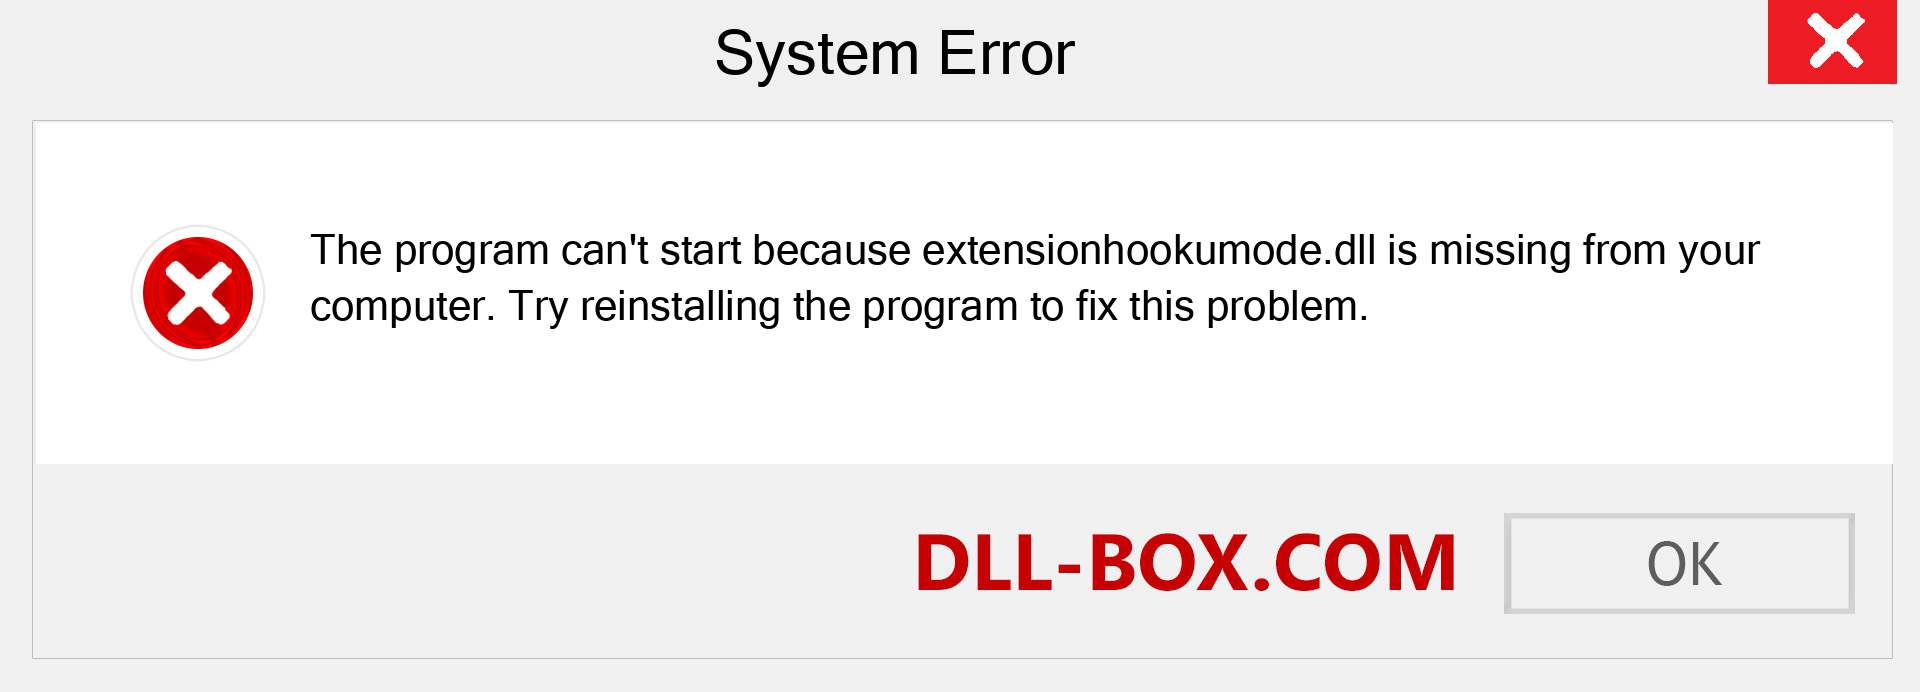  extensionhookumode.dll file is missing?. Download for Windows 7, 8, 10 - Fix  extensionhookumode dll Missing Error on Windows, photos, images